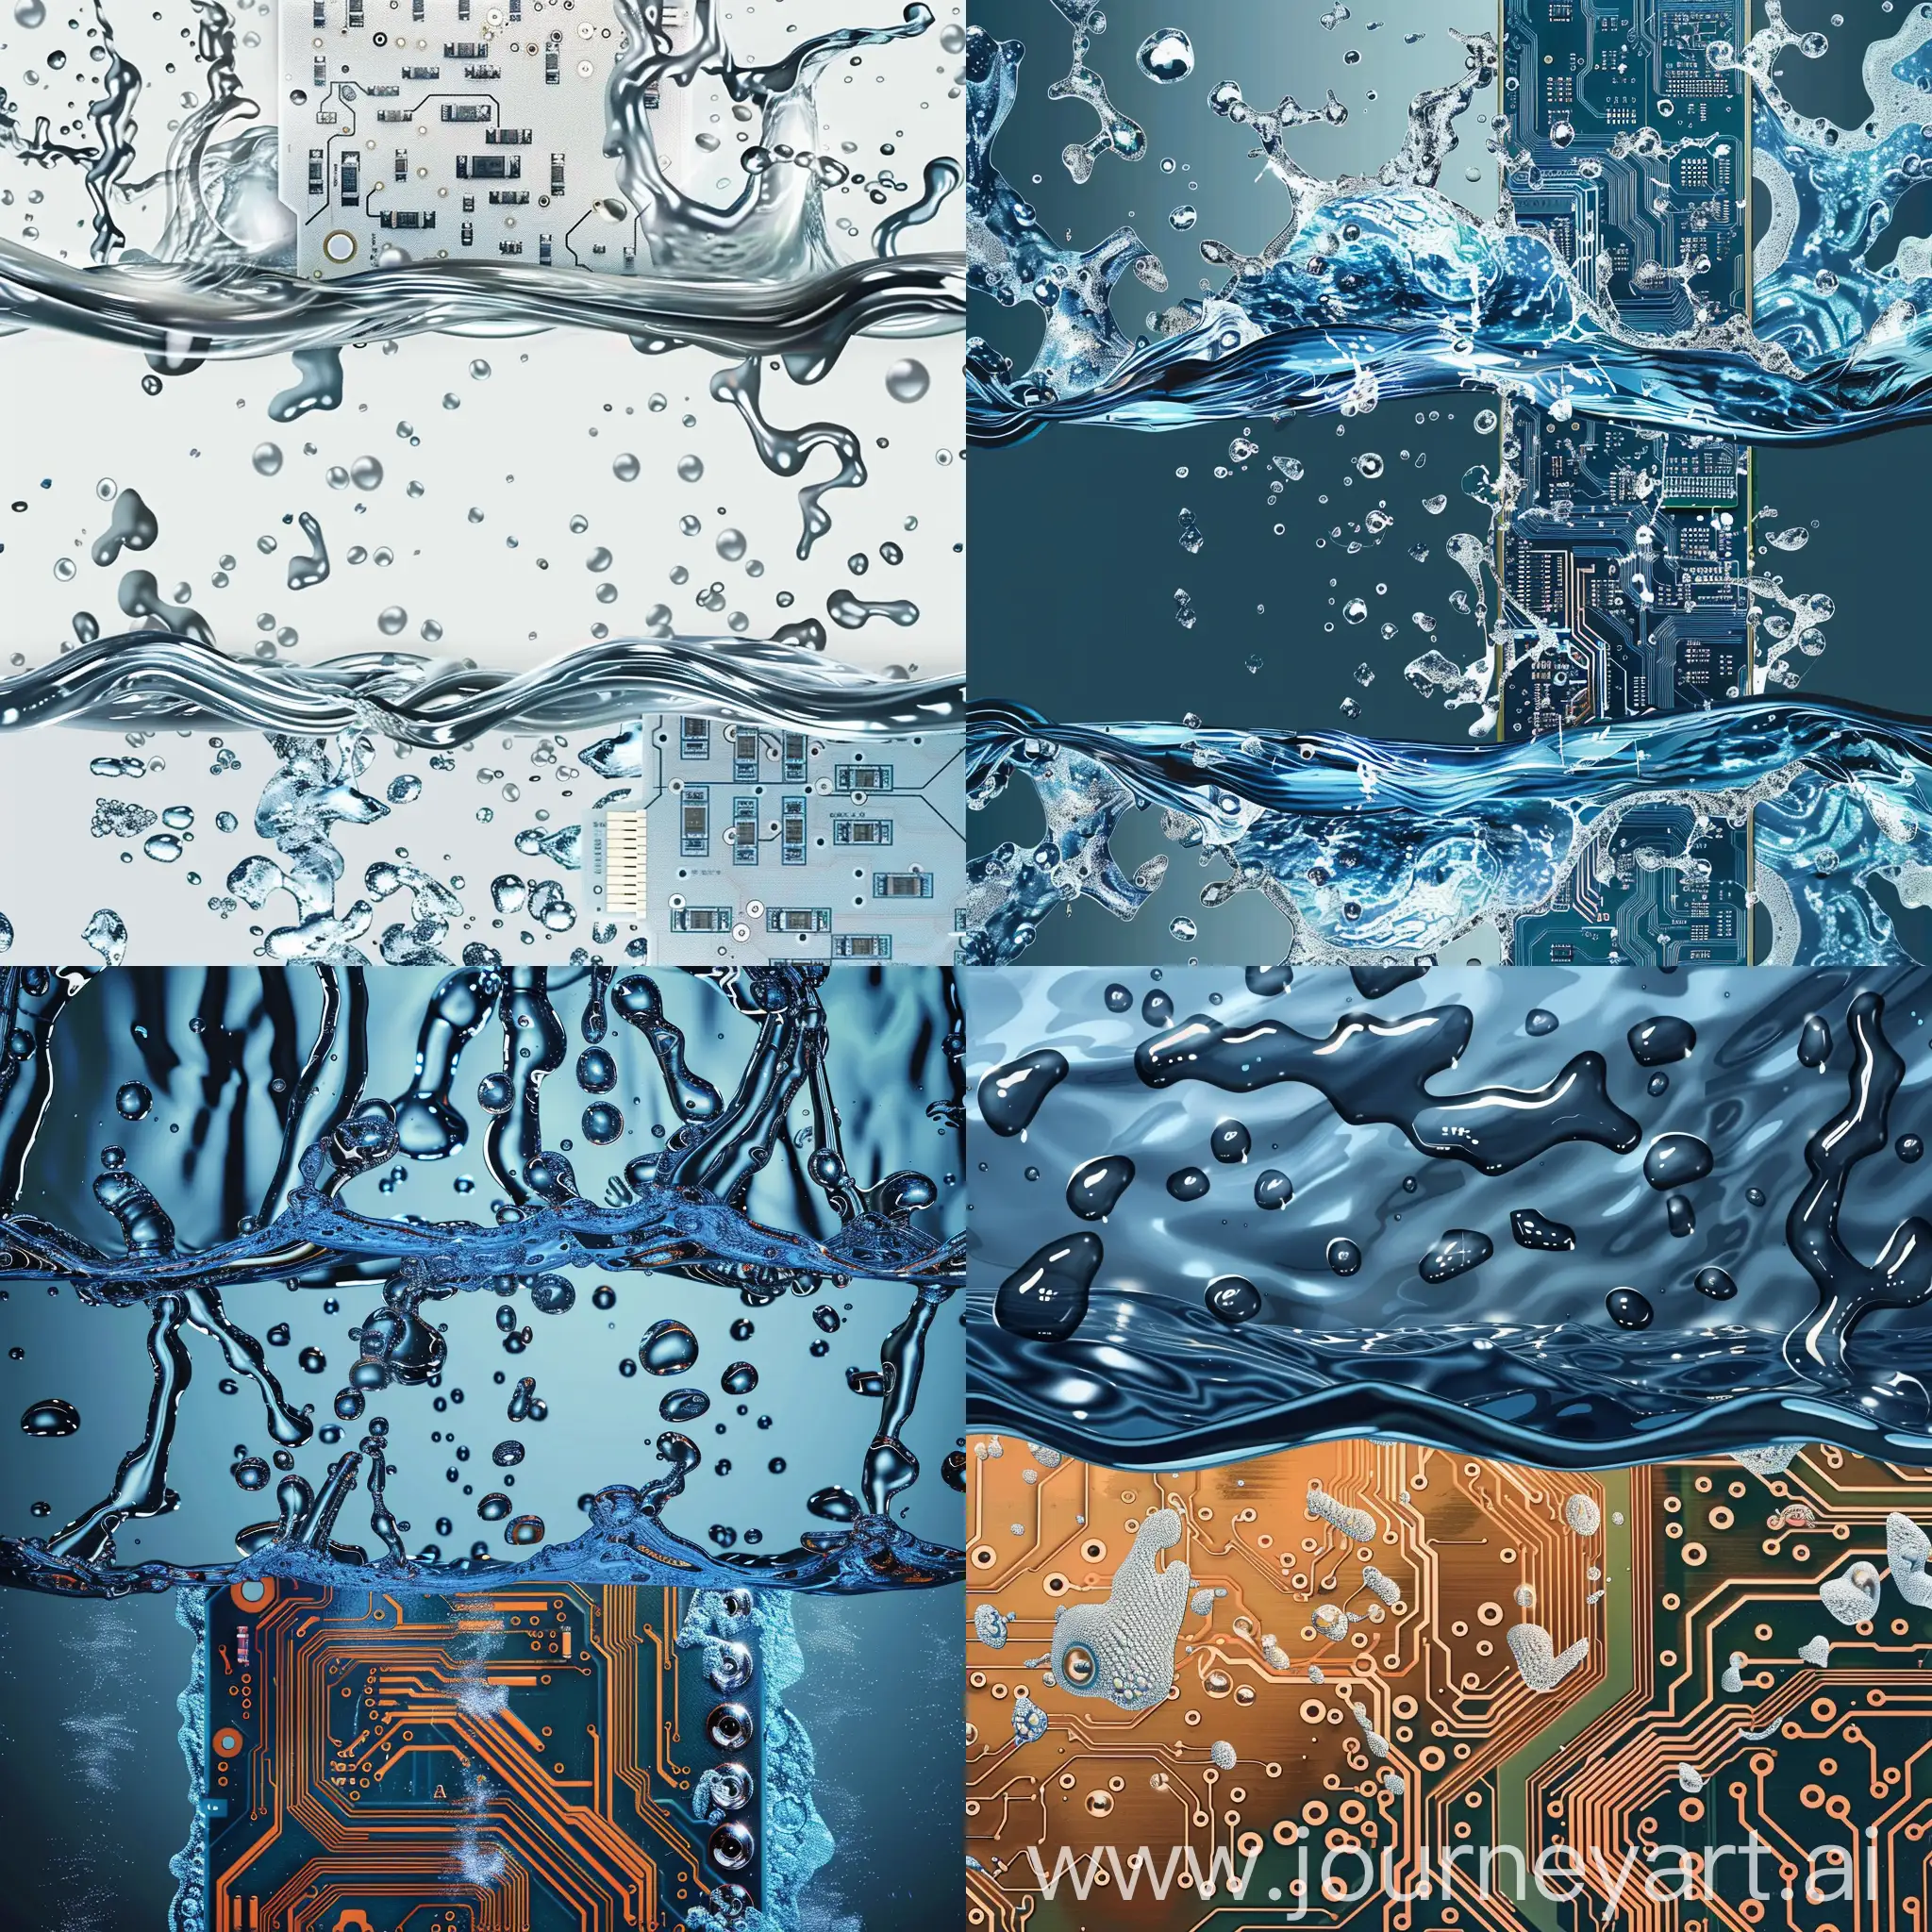 Realistic-Circuit-Board-Washing-Water-with-Wave-Elements